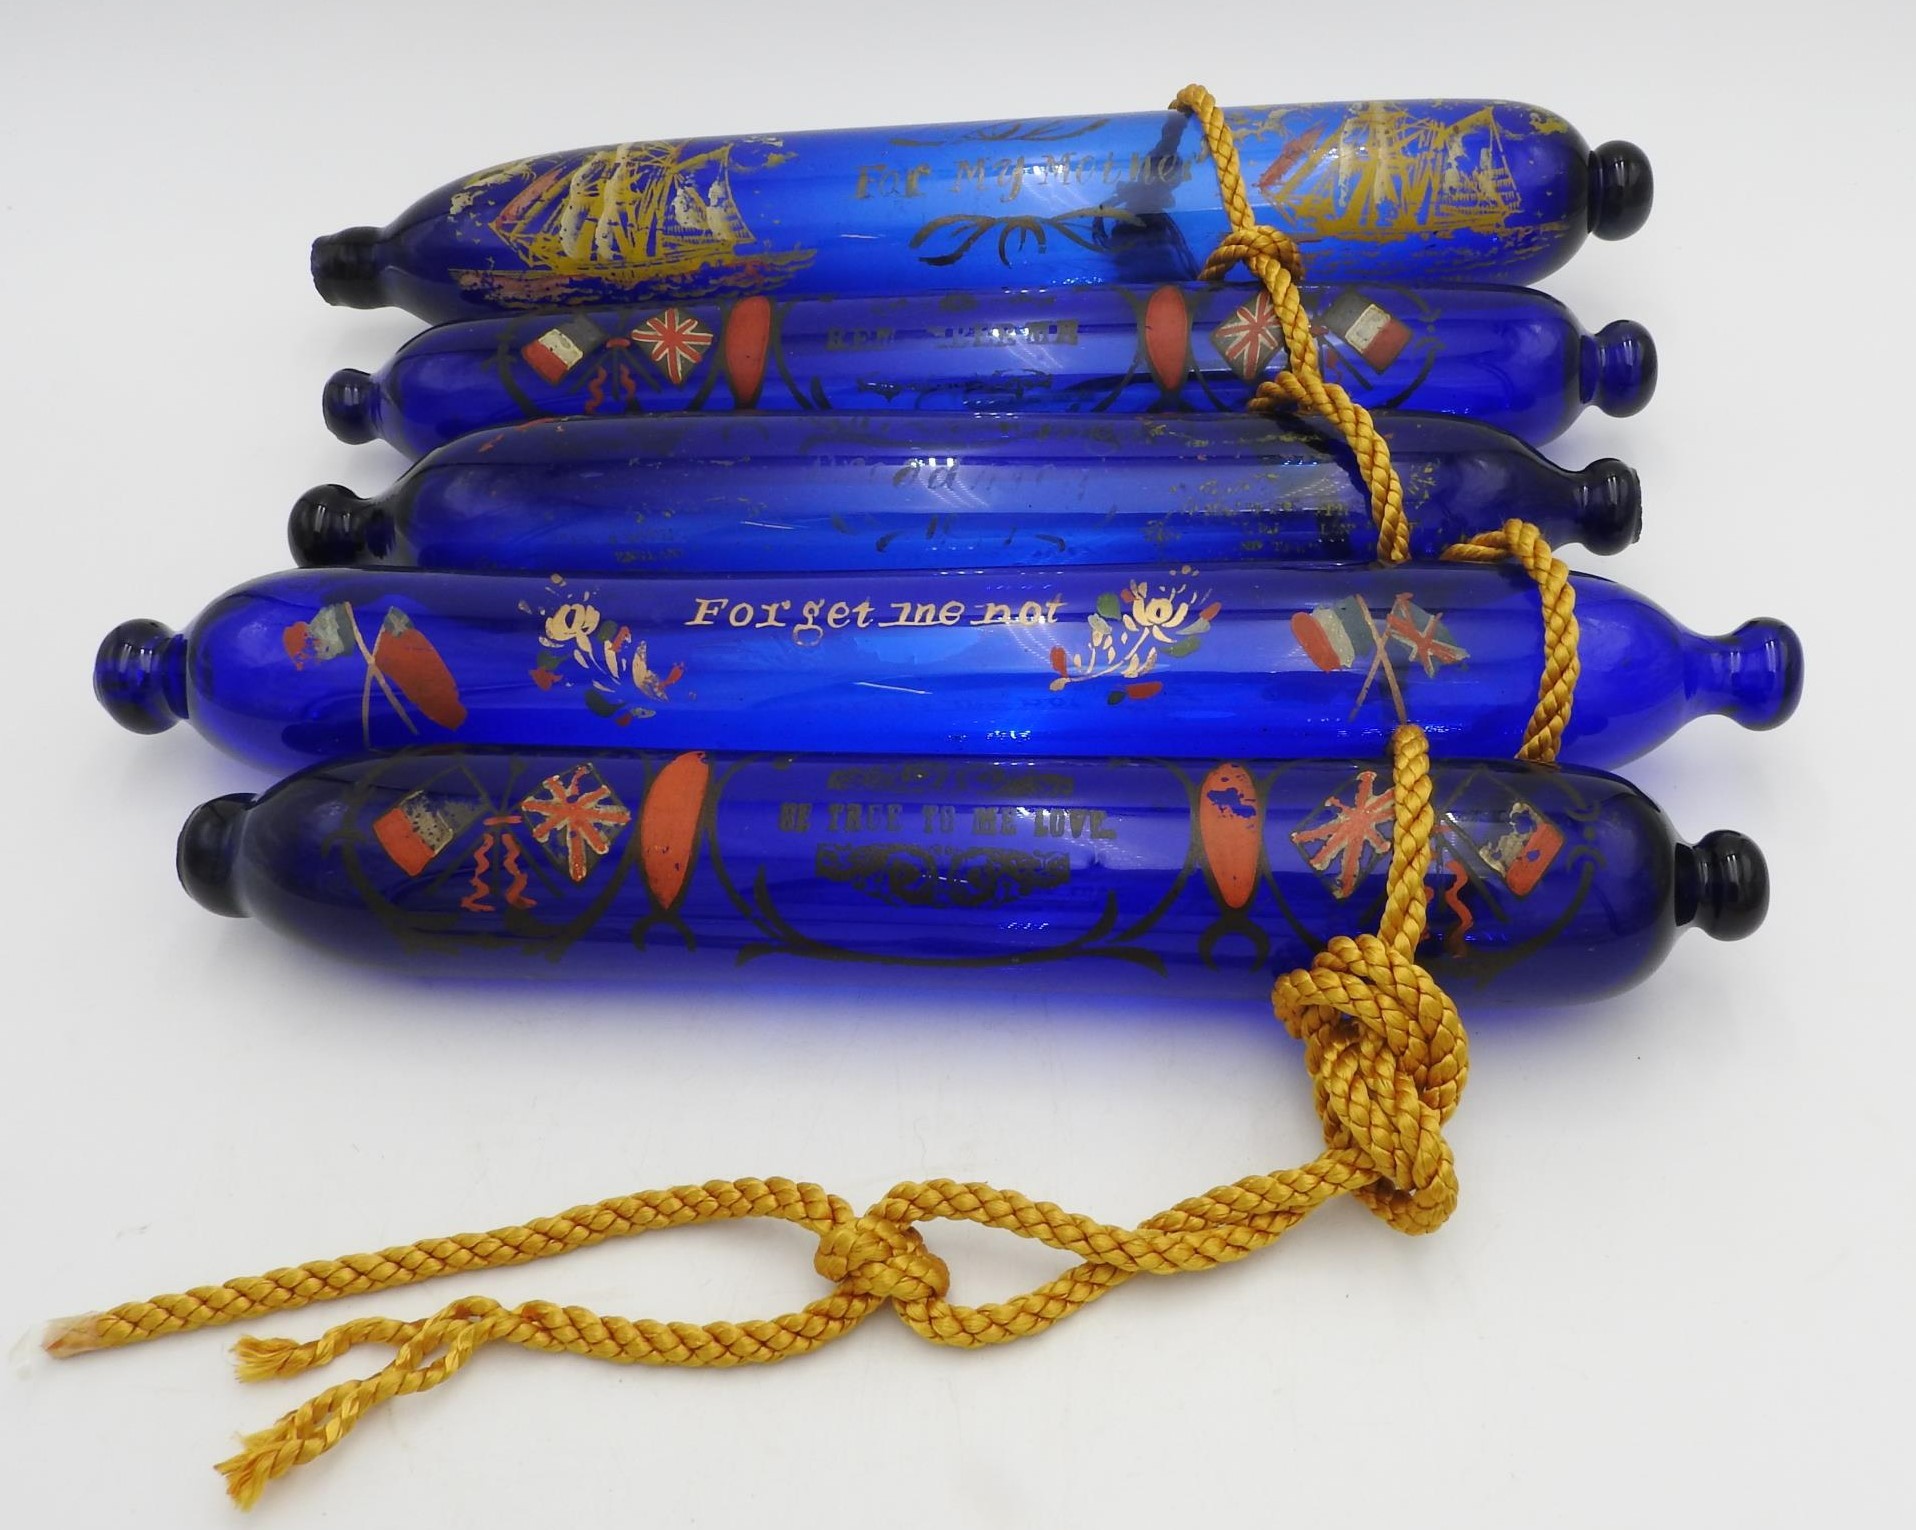 FIVE EARLY 19TH CENTURY COMMEMORATIVE BRISTOL COBALT BLUE GLASS NAVAL ROLLING PINS, 33 cm long